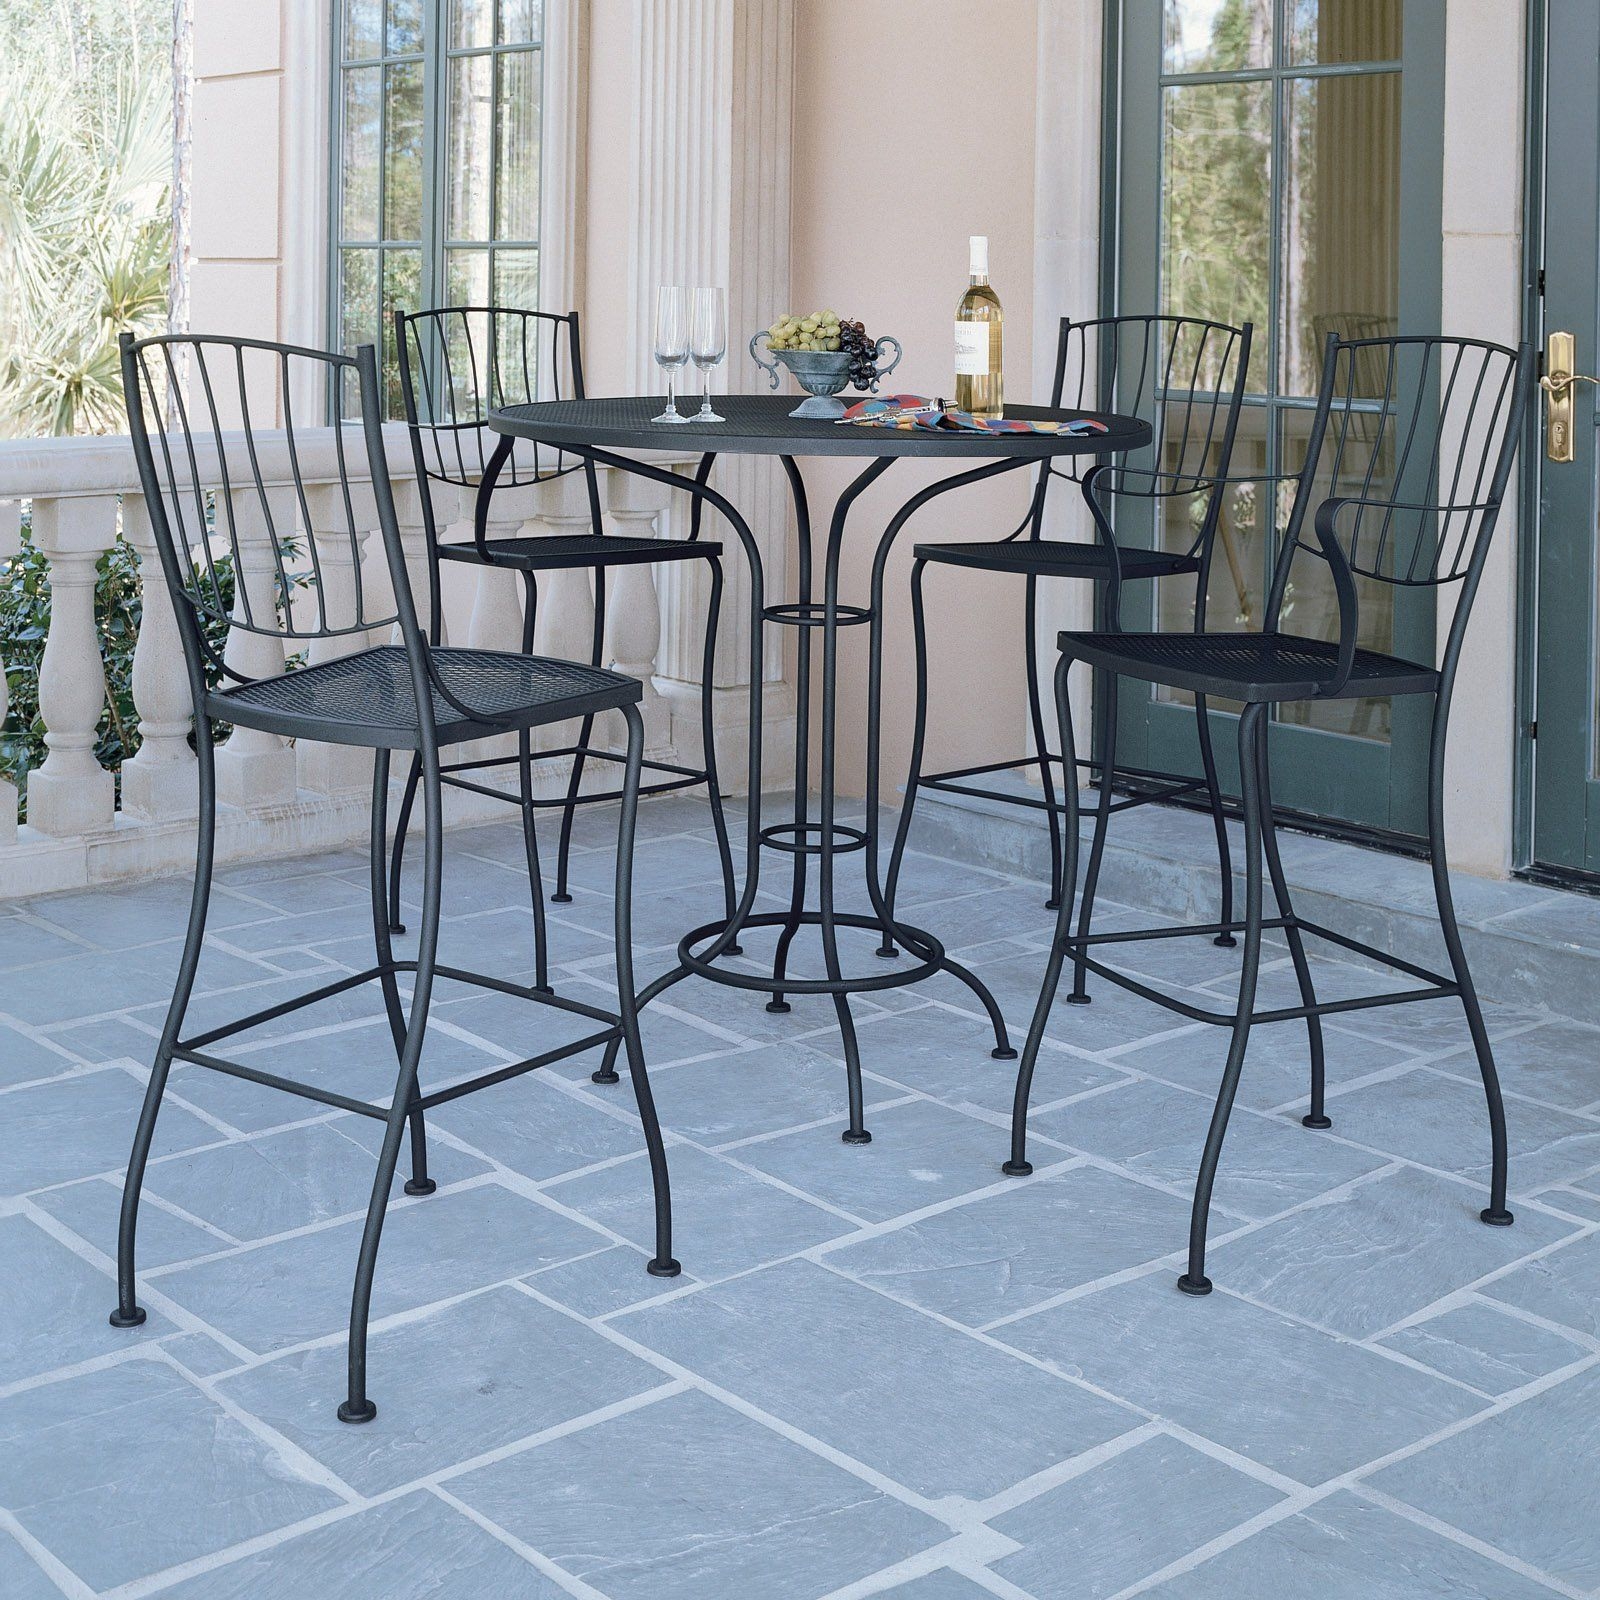 Aurora wrought iron bar height bistro set includes table 2